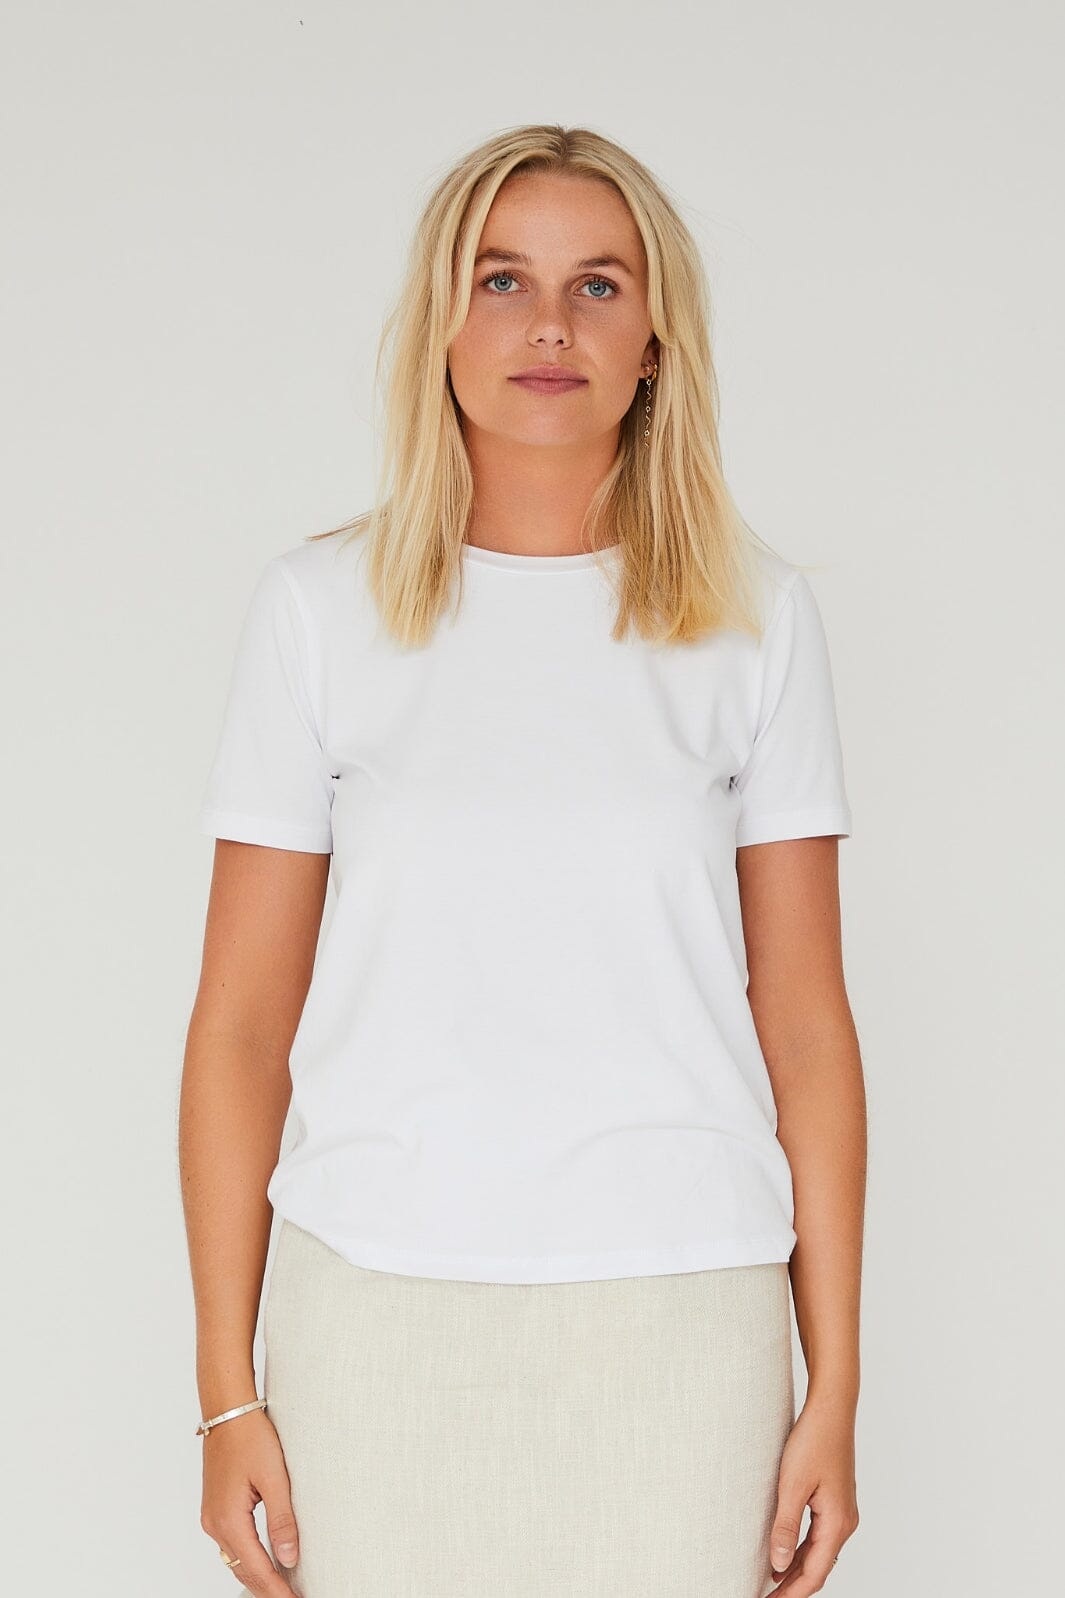 A-VIEW - Stabil Top S/S - 000 White T-shirts 